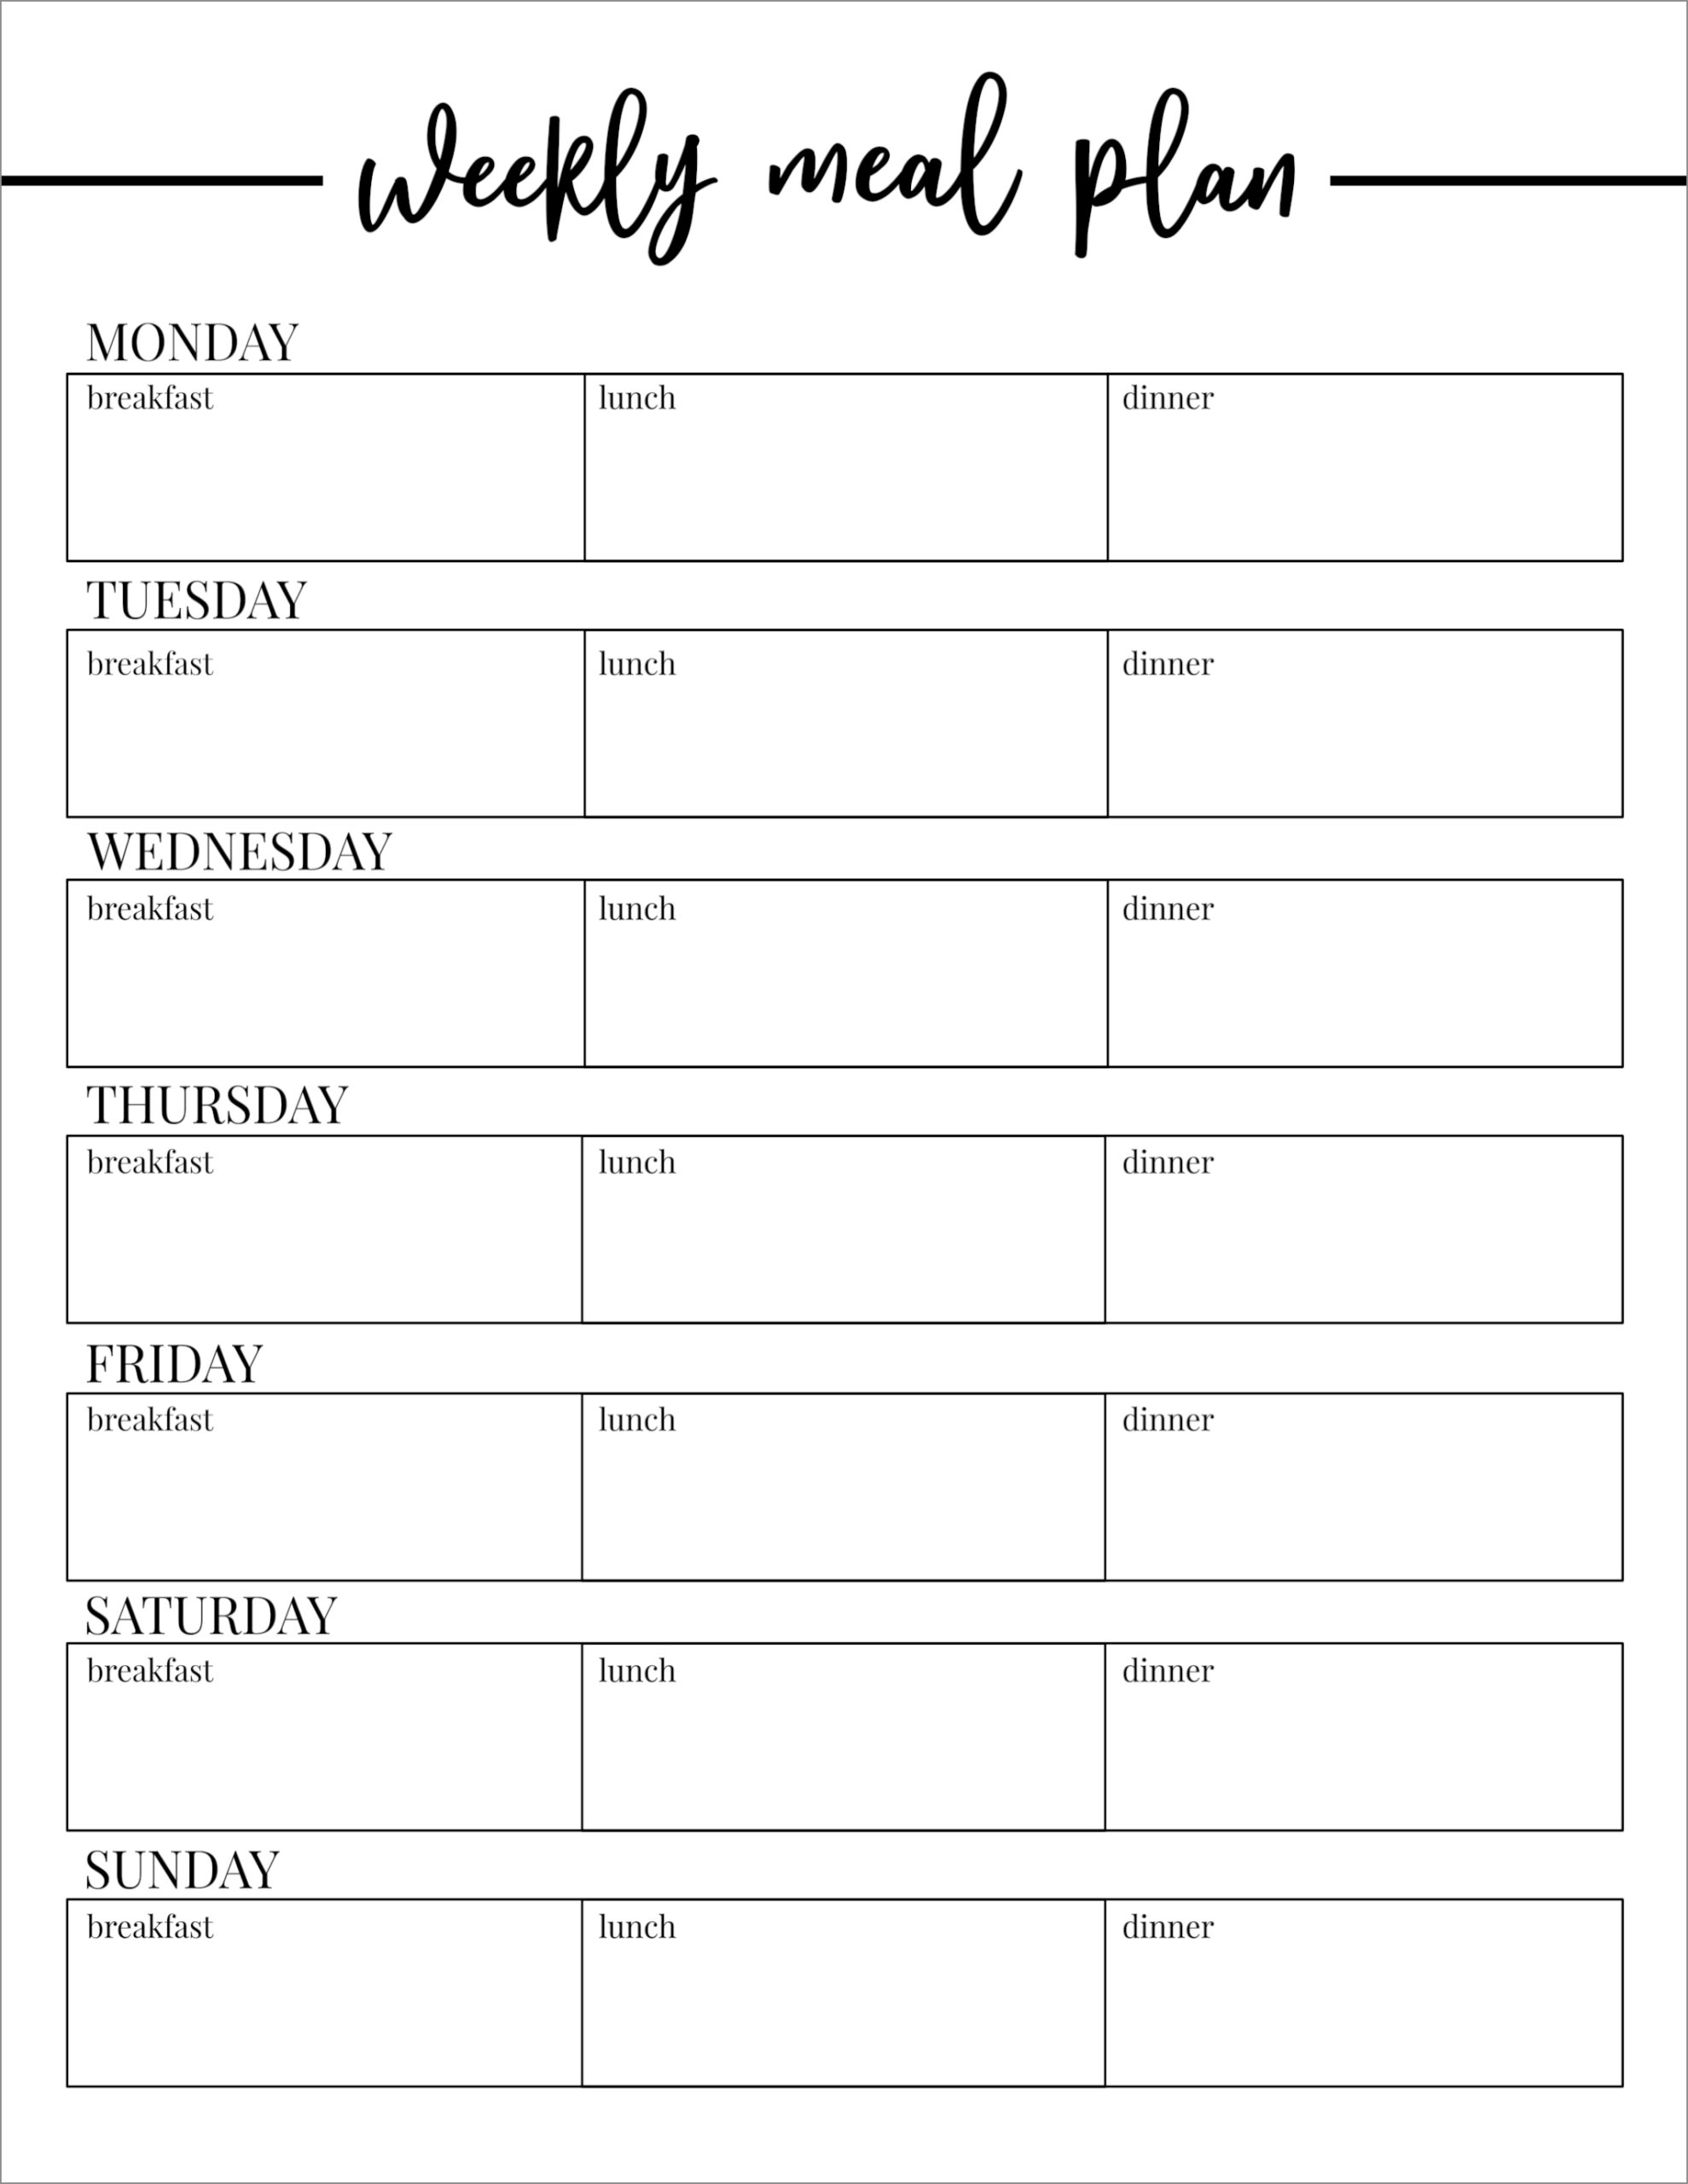 daily meal schedule template example